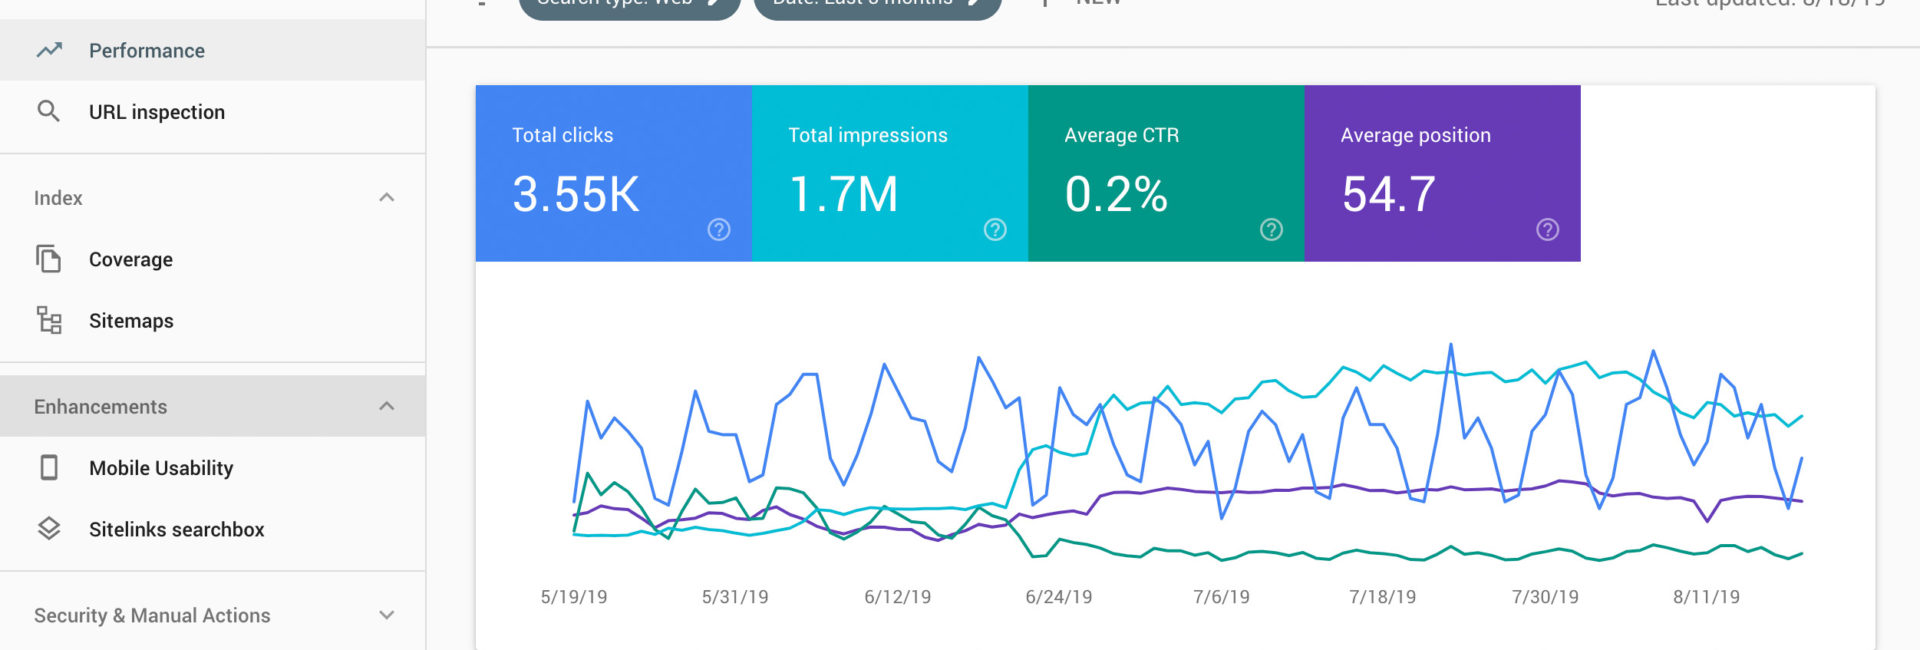 Google Search Console performance report